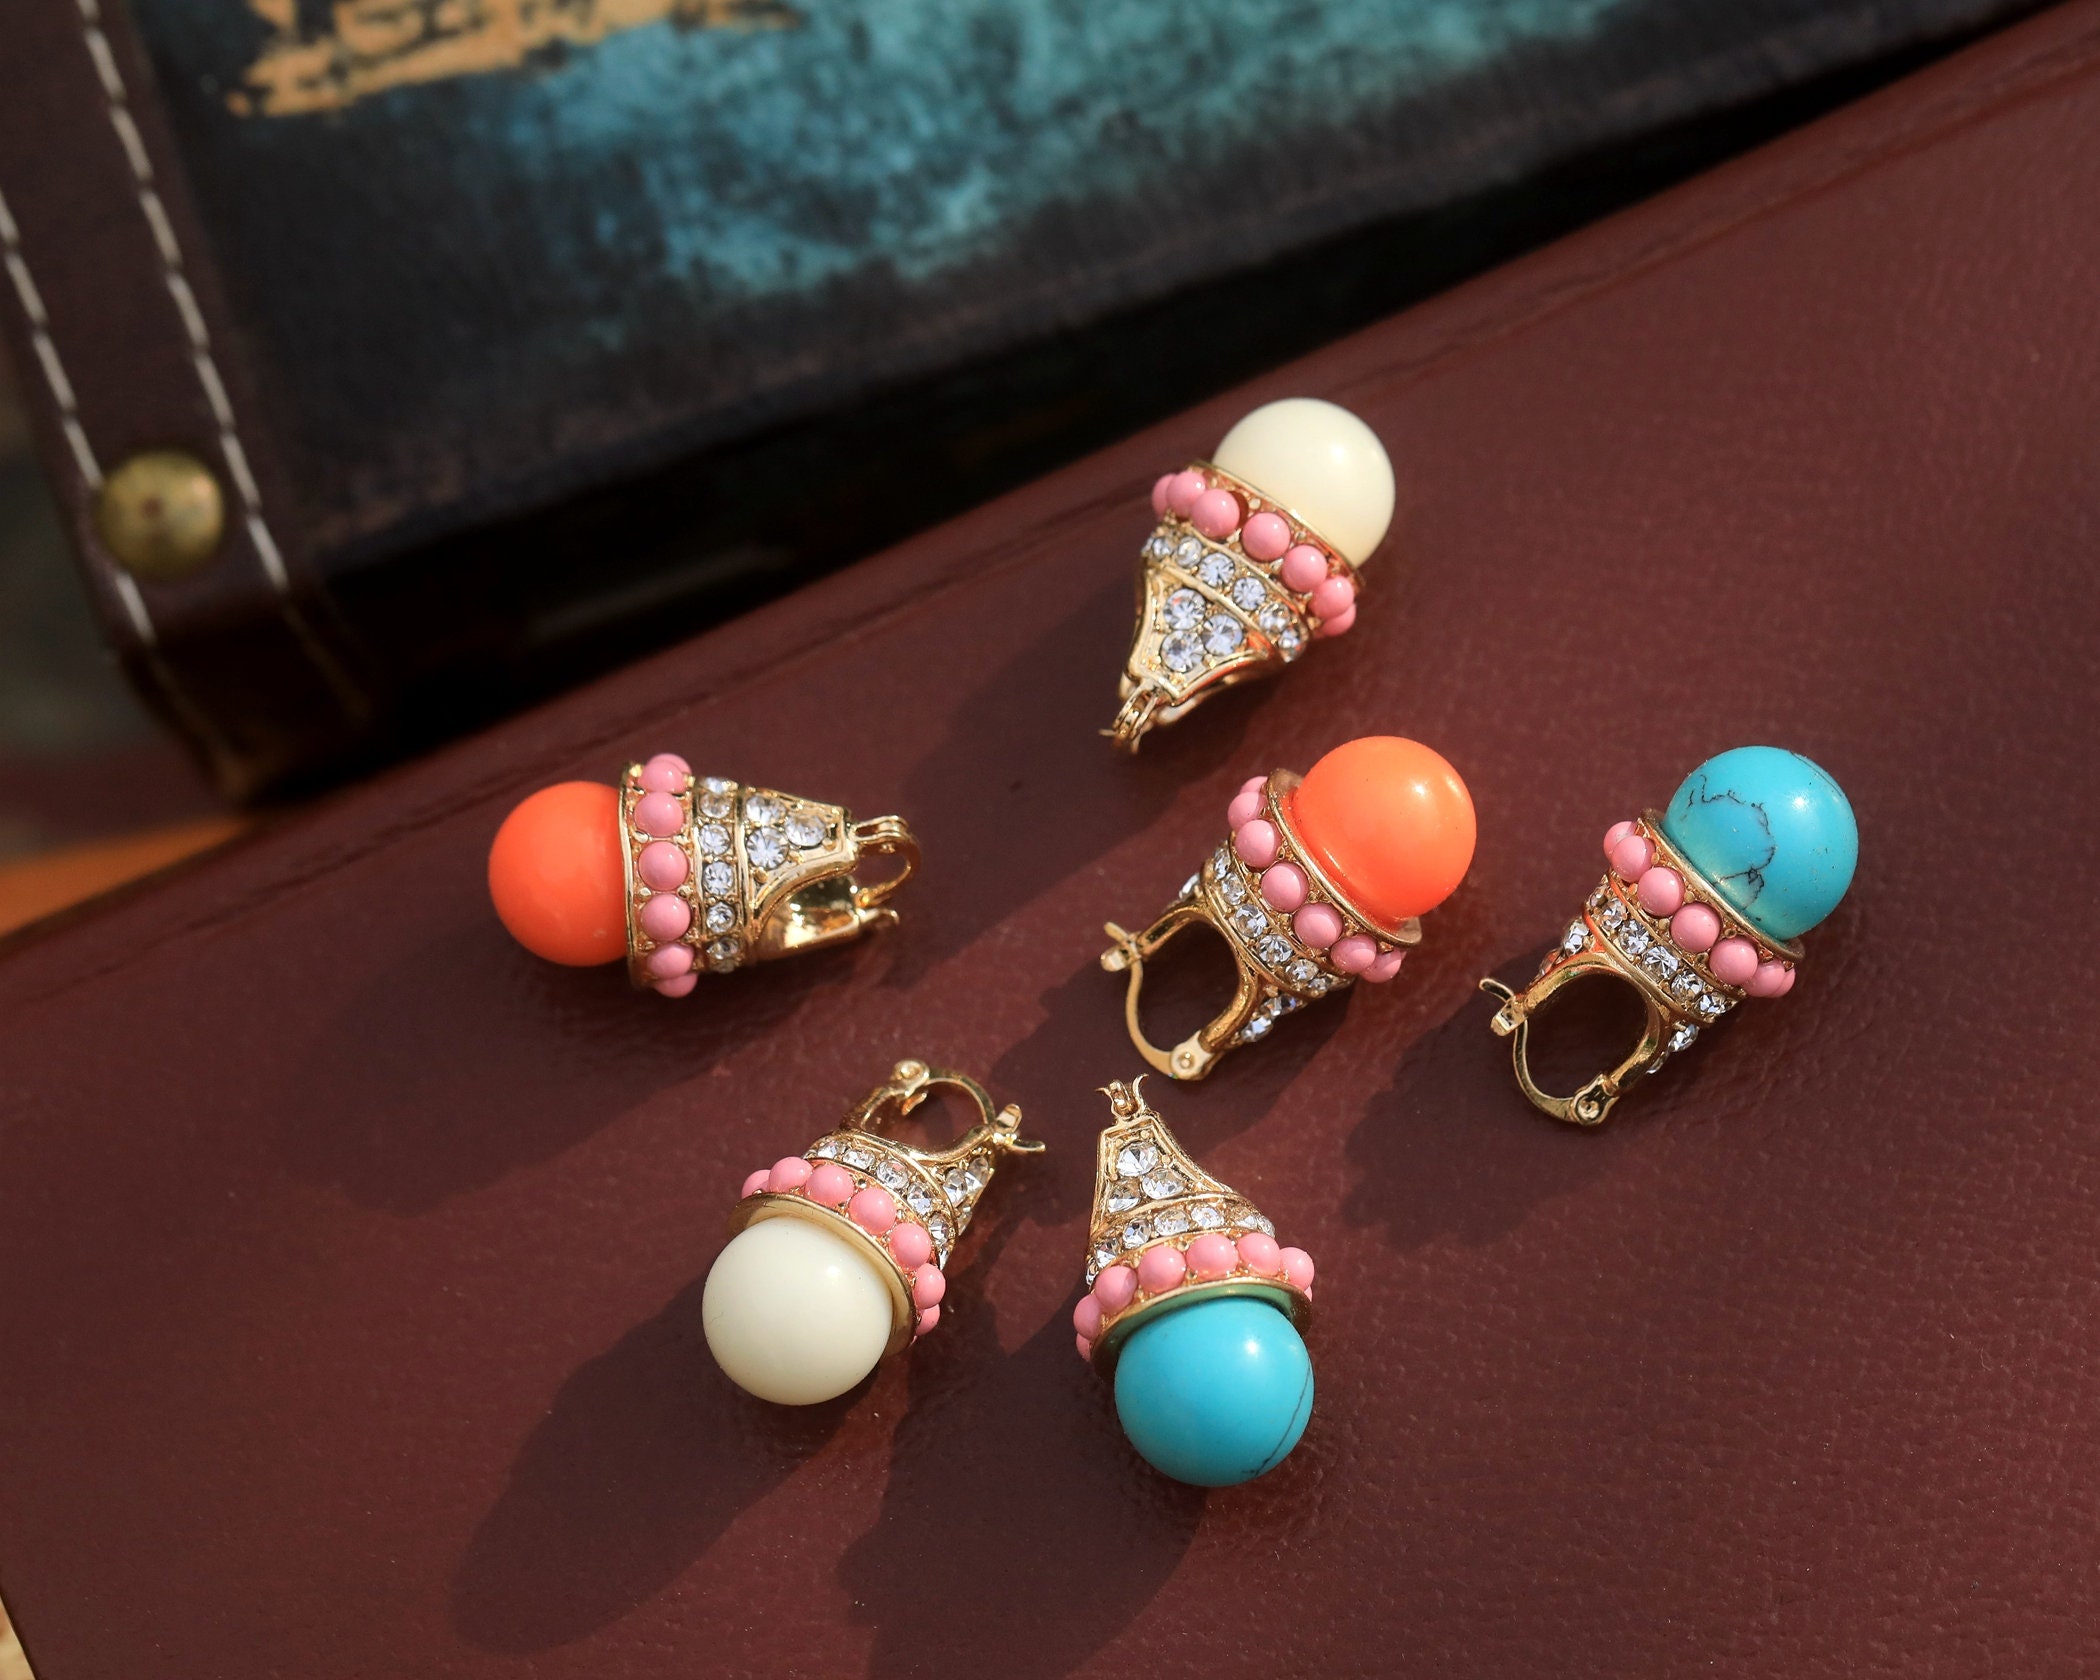 Boucles d'oreilles dormeuses CIRCUS Or - Perles blanches & turquoise